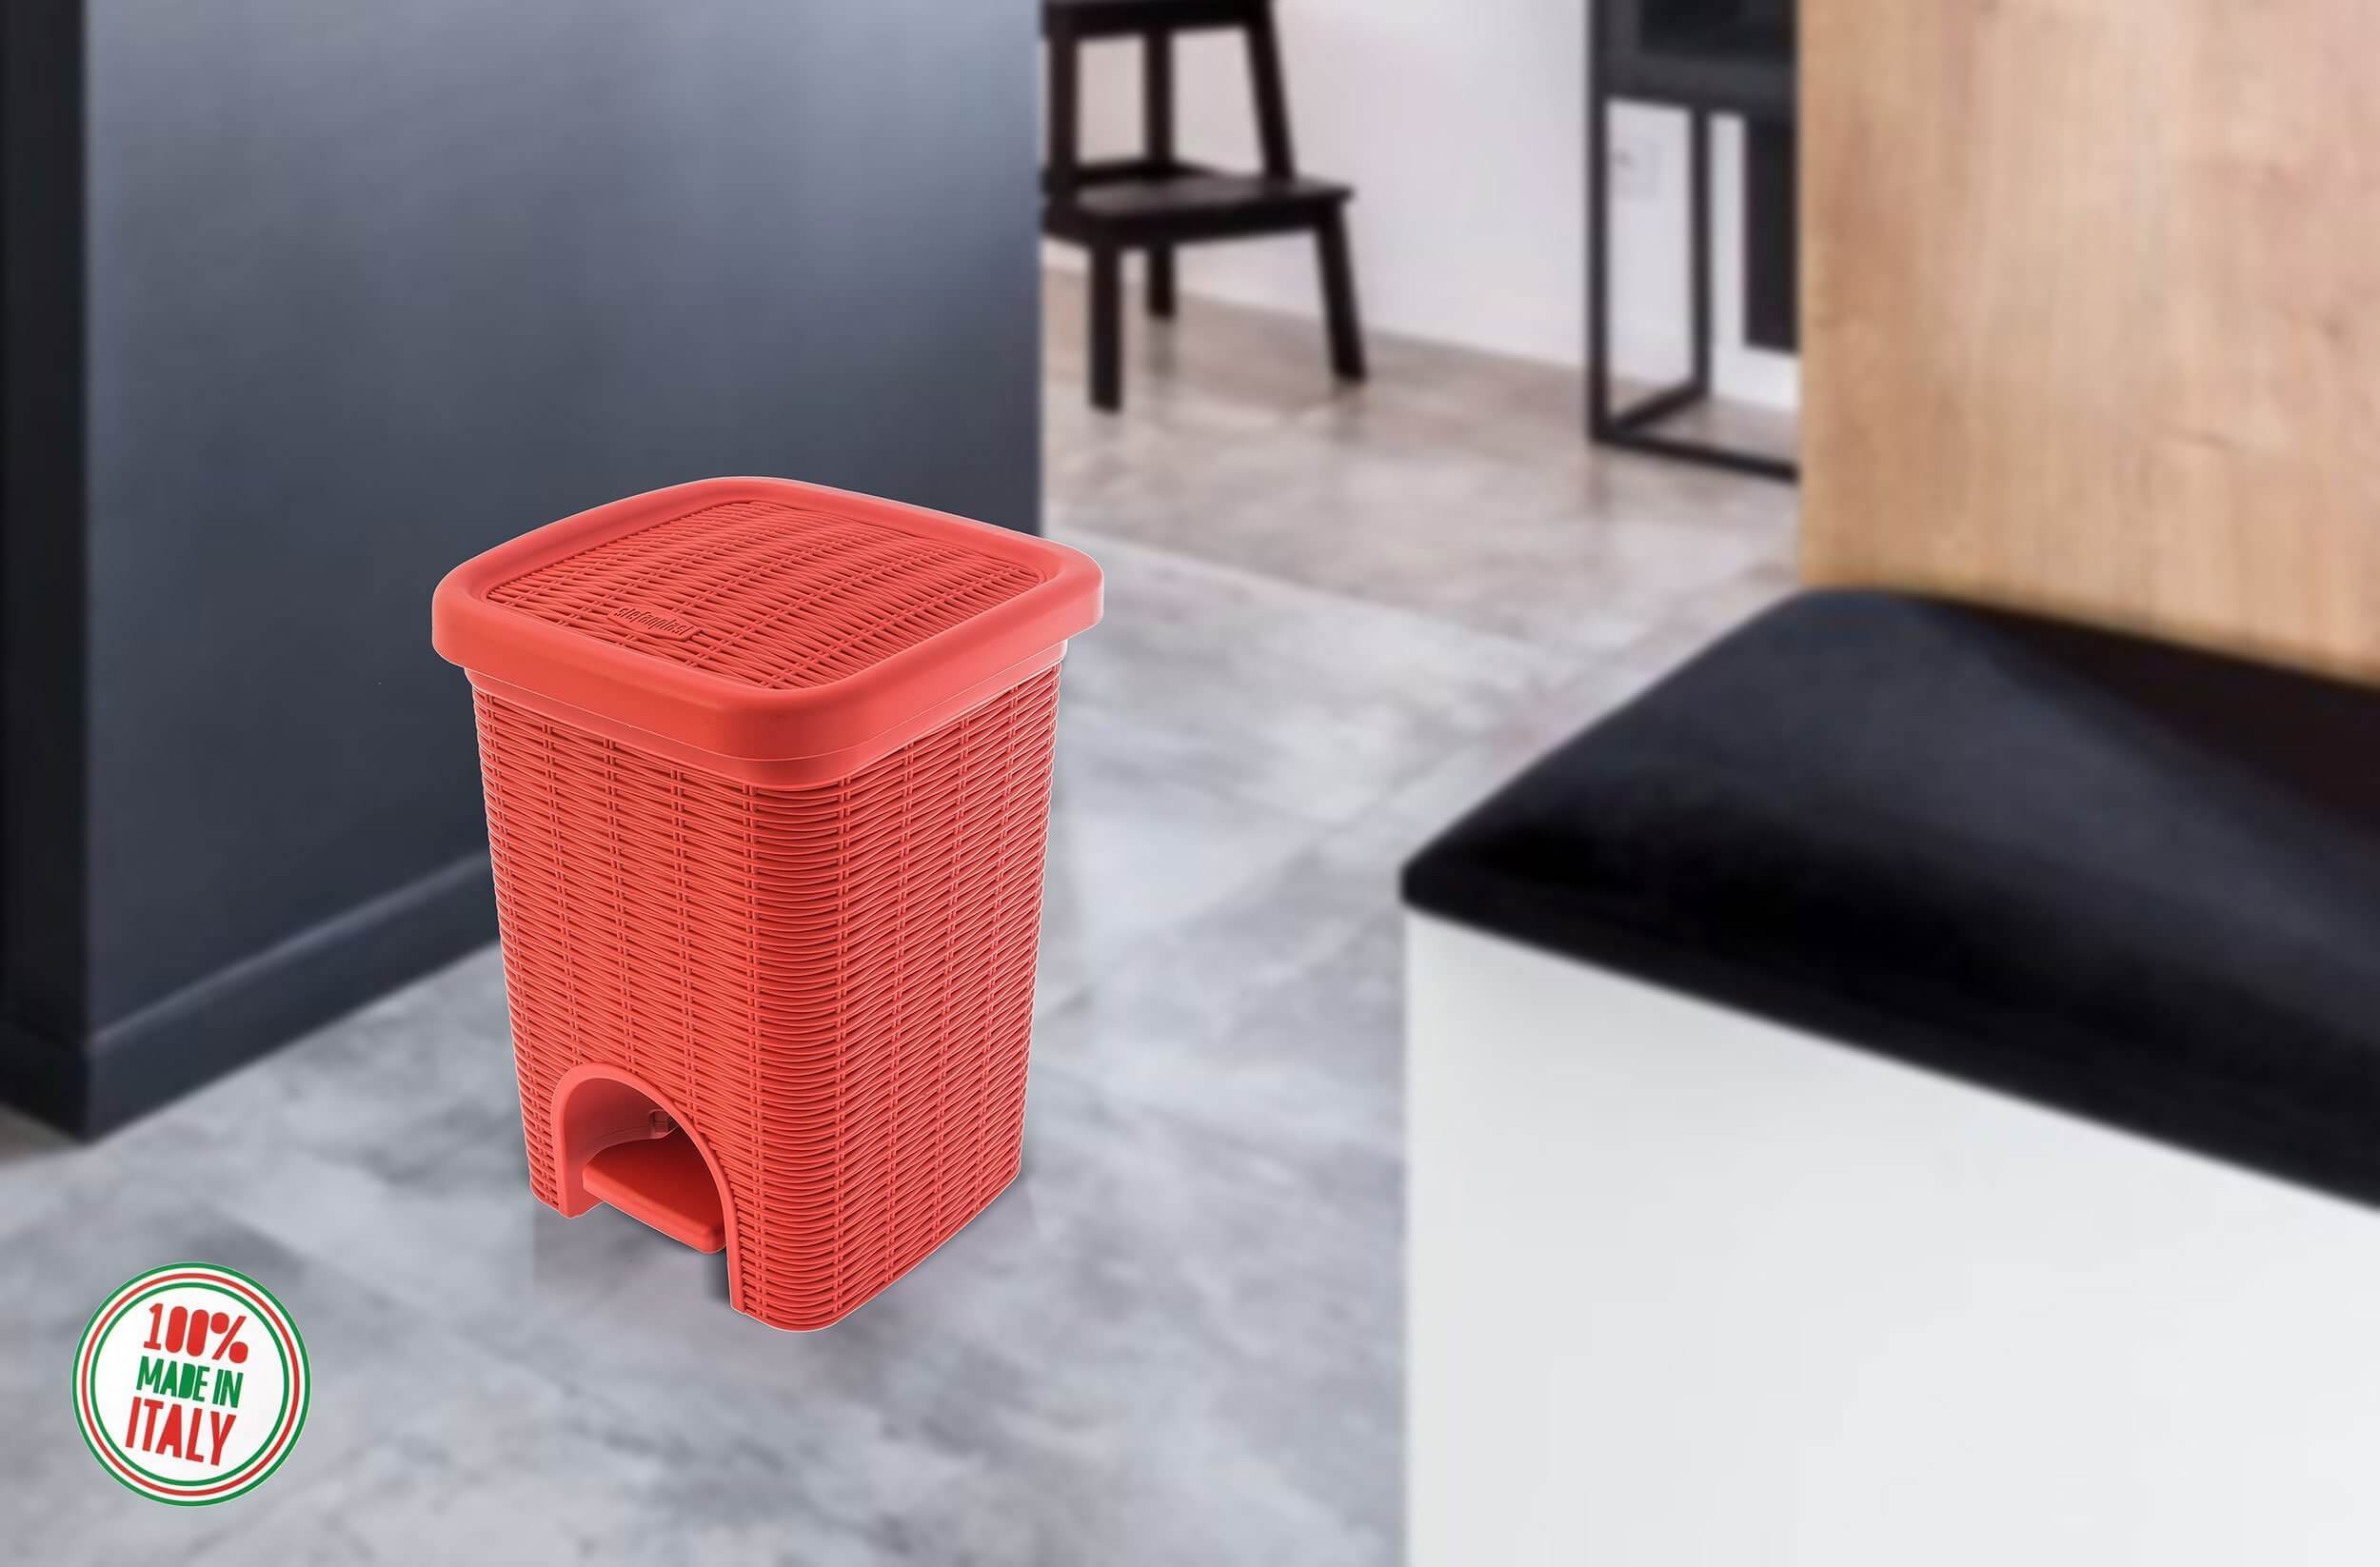 Elegance - Red 6 Litre Pedal Dustbin with Plastic Bucket Inside for Home, Kitchen, Office use